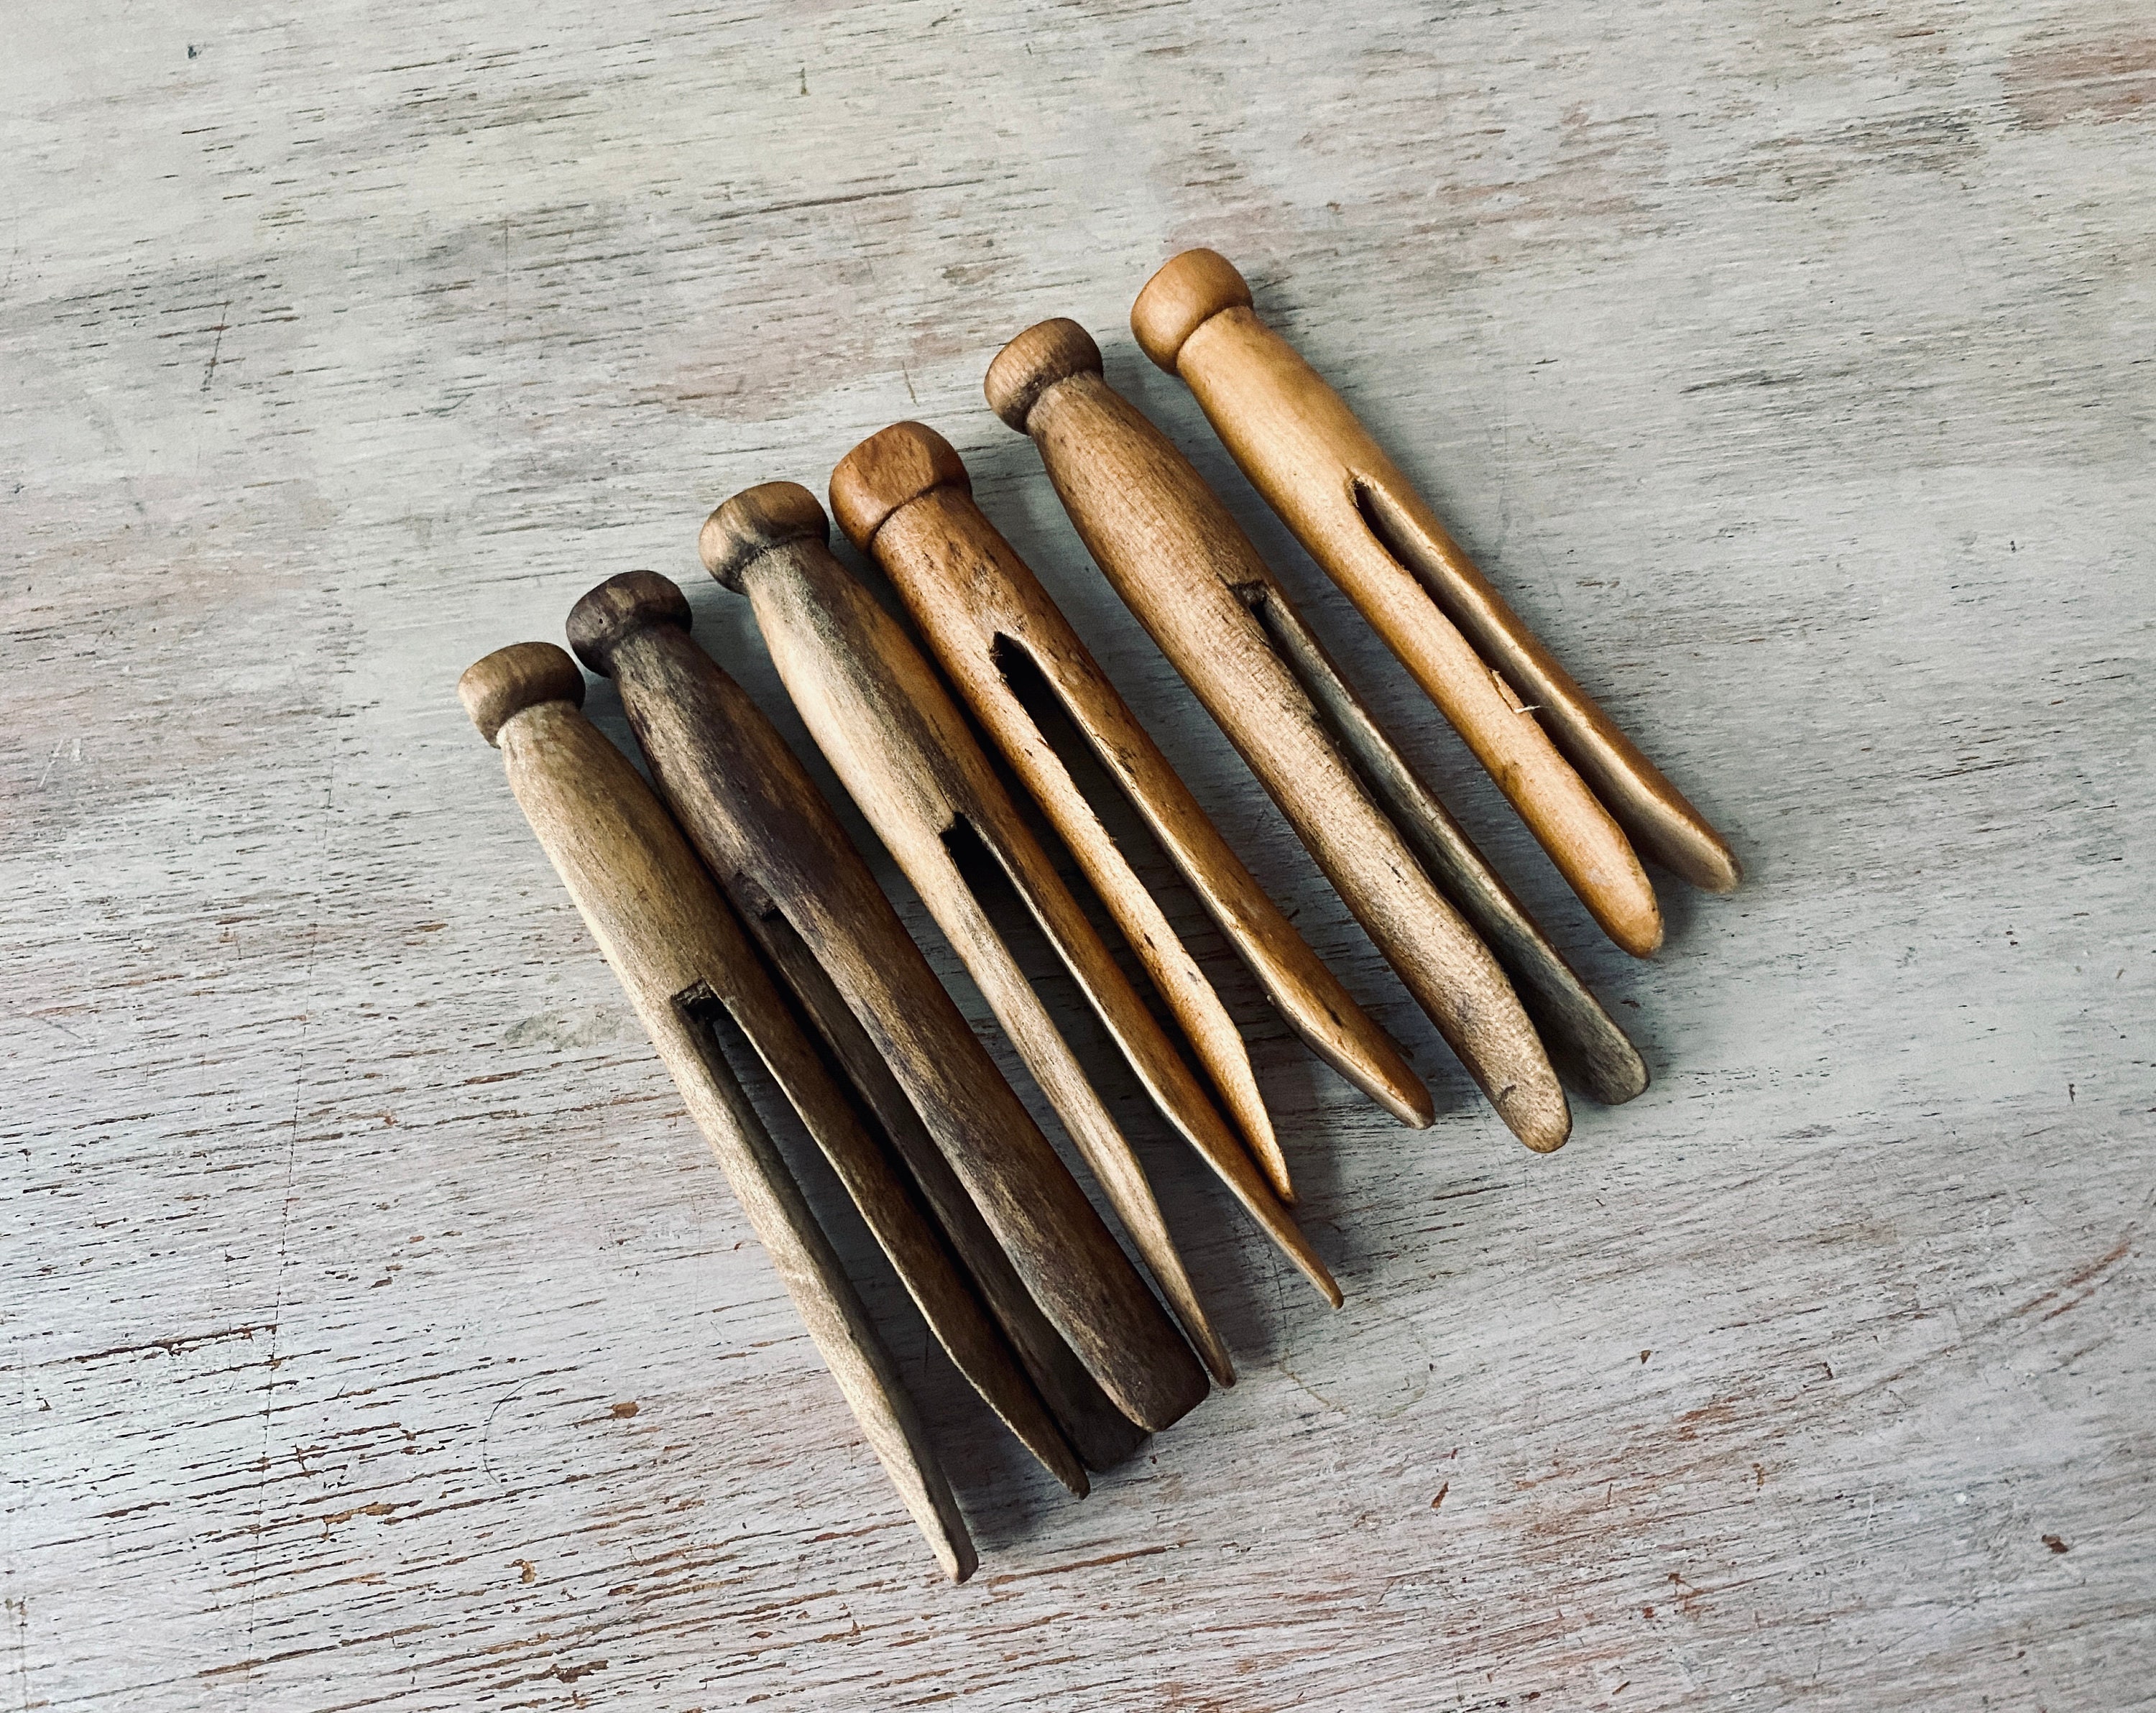 10 X Old Wooden Clothes Pegs / Vintage Wooden Pegs / Pegs for Laundry 